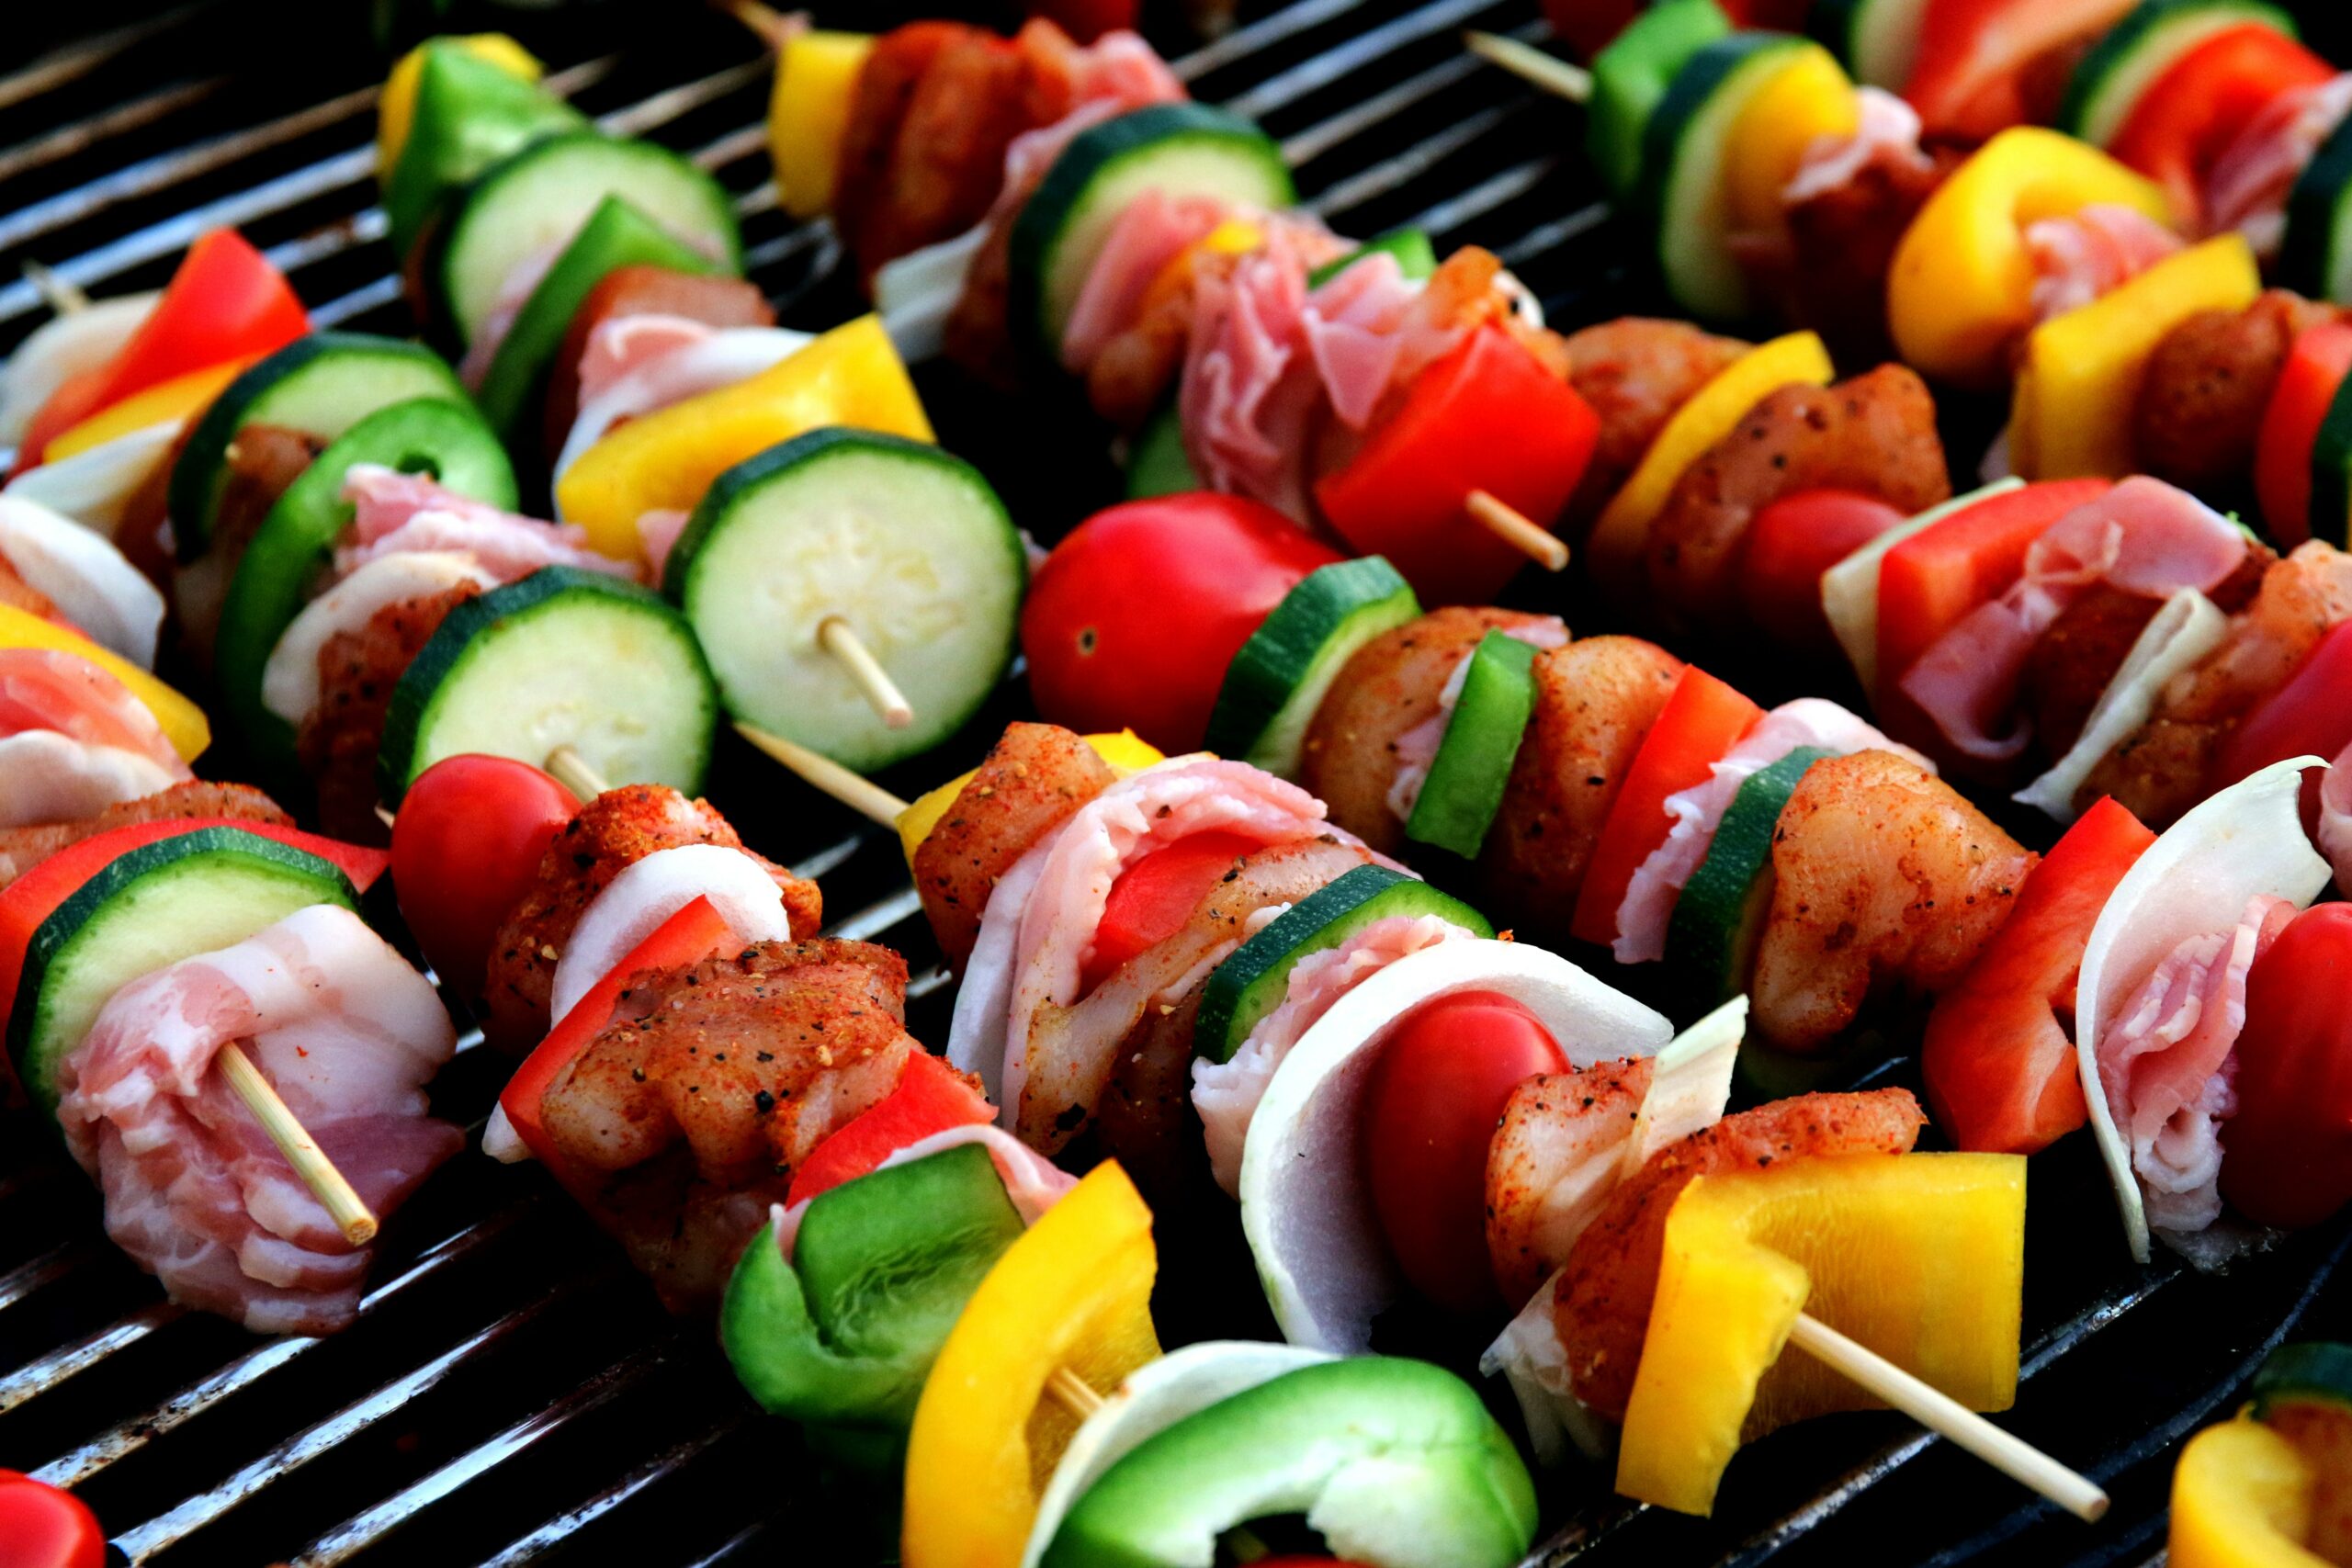 Fire up the Grill for National Grilling Month by Johanna Hicks